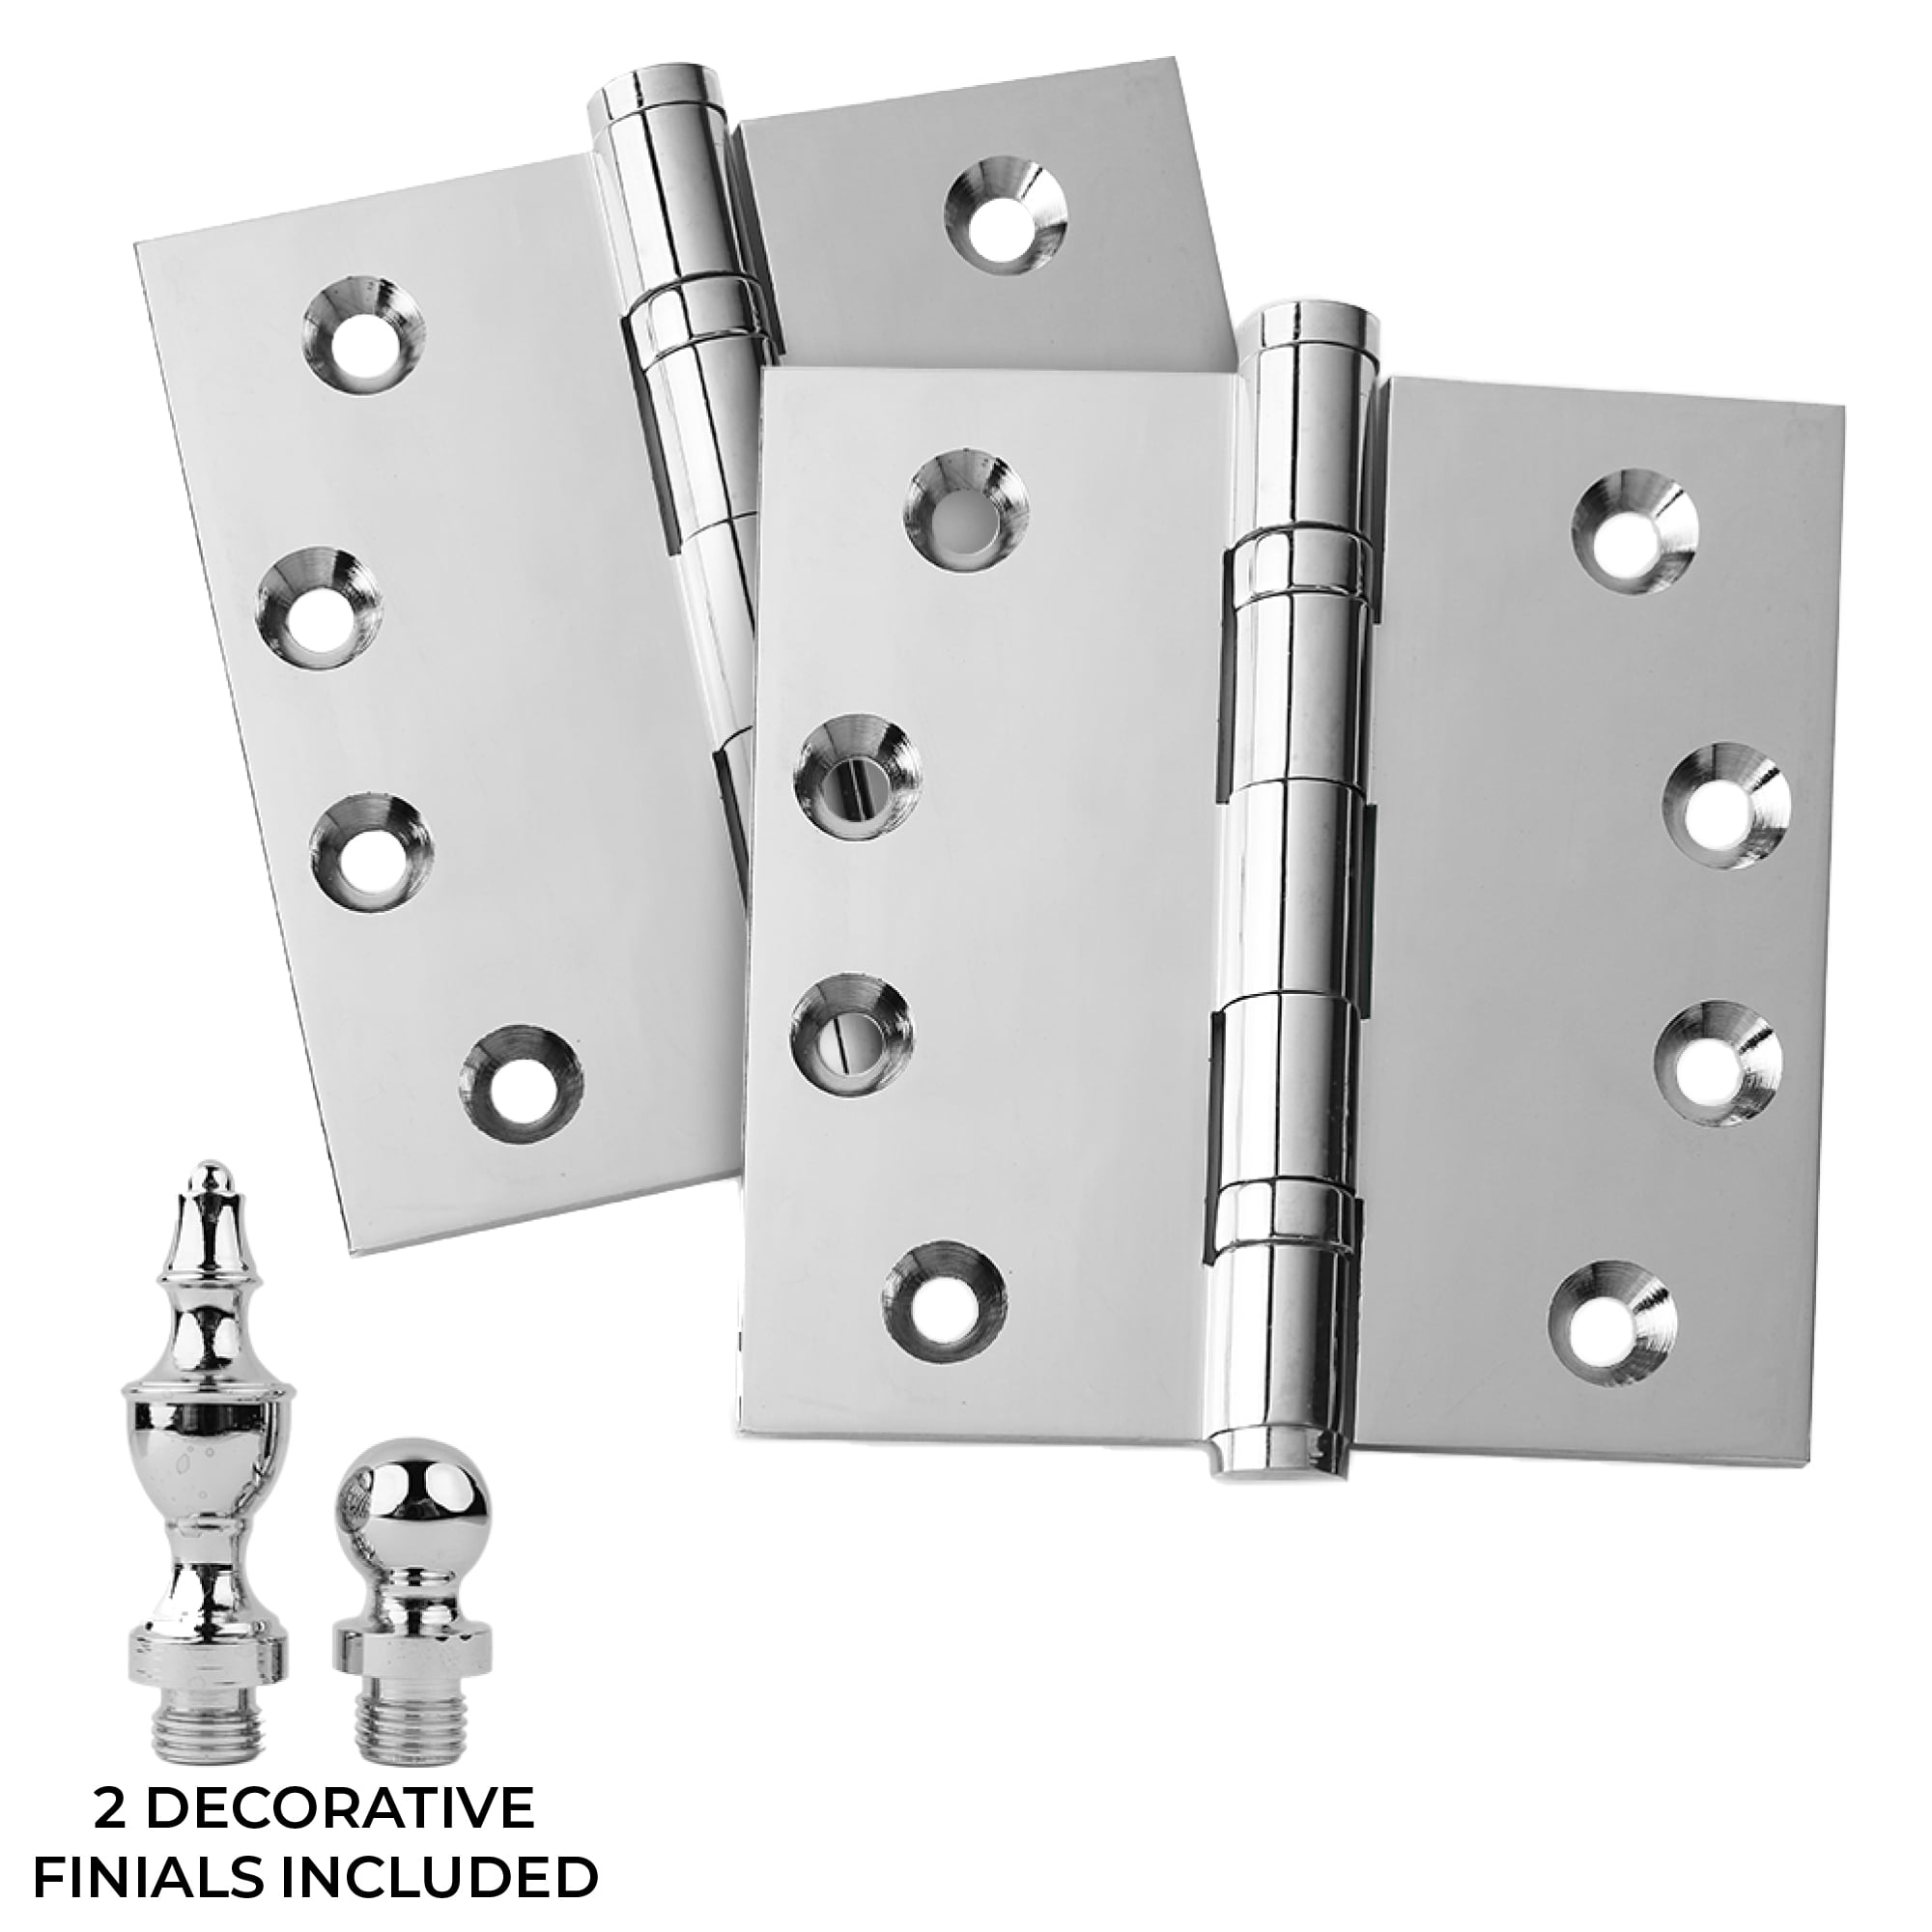 Set of 2 Hinges Satin Brass Architectural Solid Brass Ball Bearing Hinges 2-Pack Door Hinges 4.5 x 4.5 Stainless Steel Pin US4 Finish Ball/Urn/Button Tips Included 